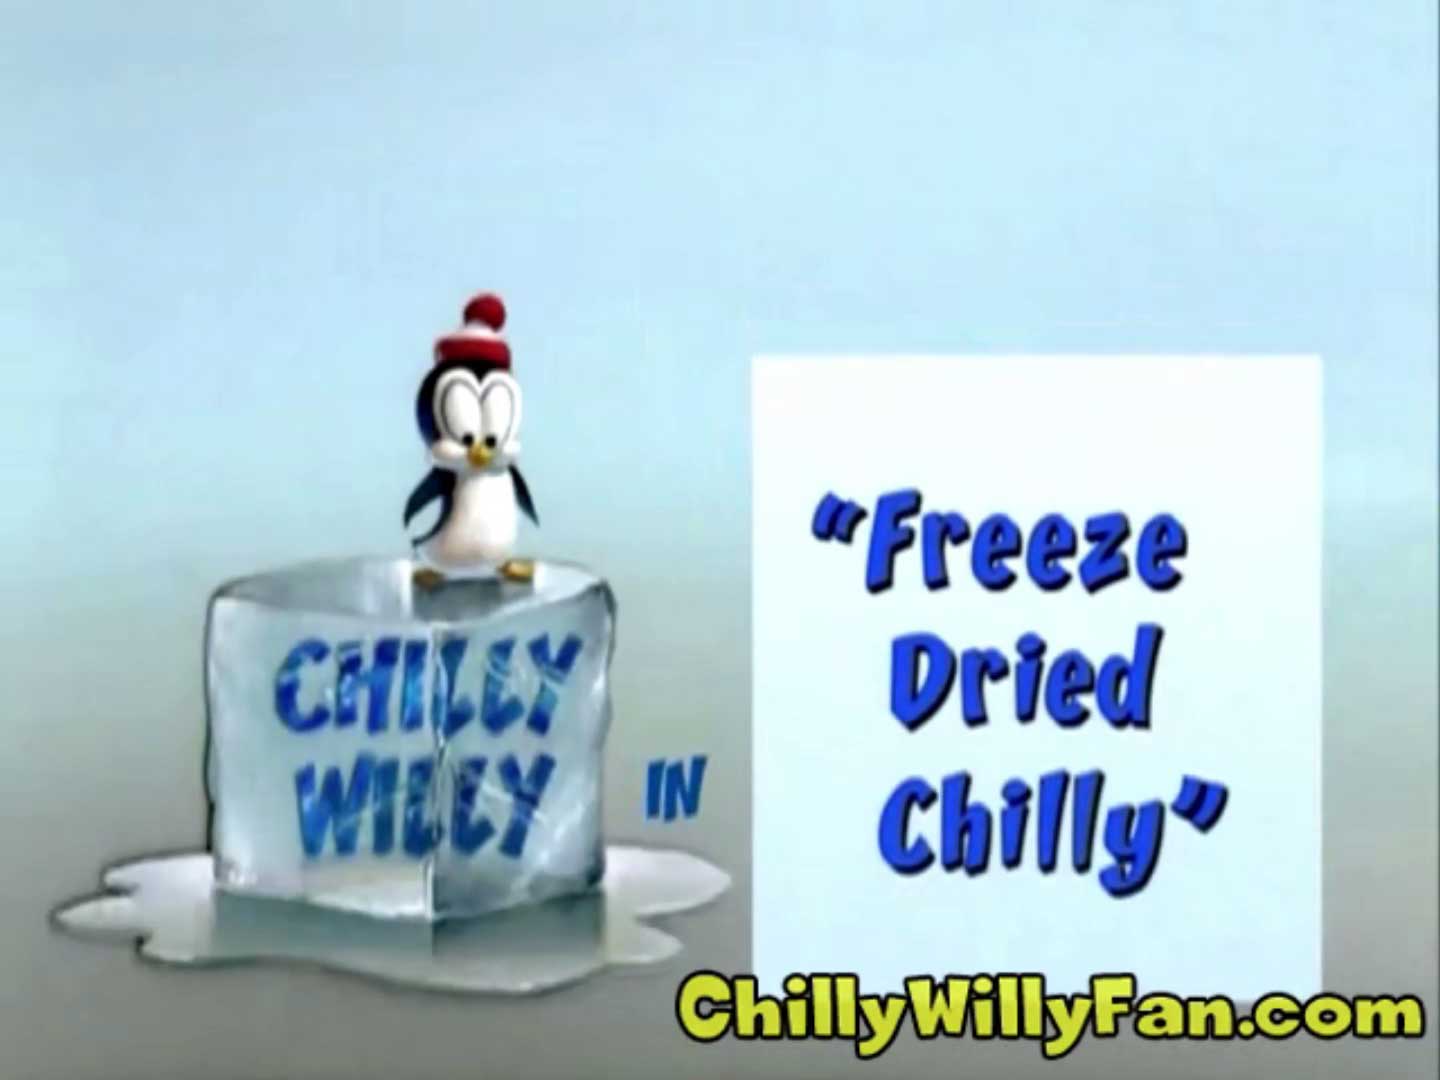 Chilly Willy - Freeze Dried Chilly